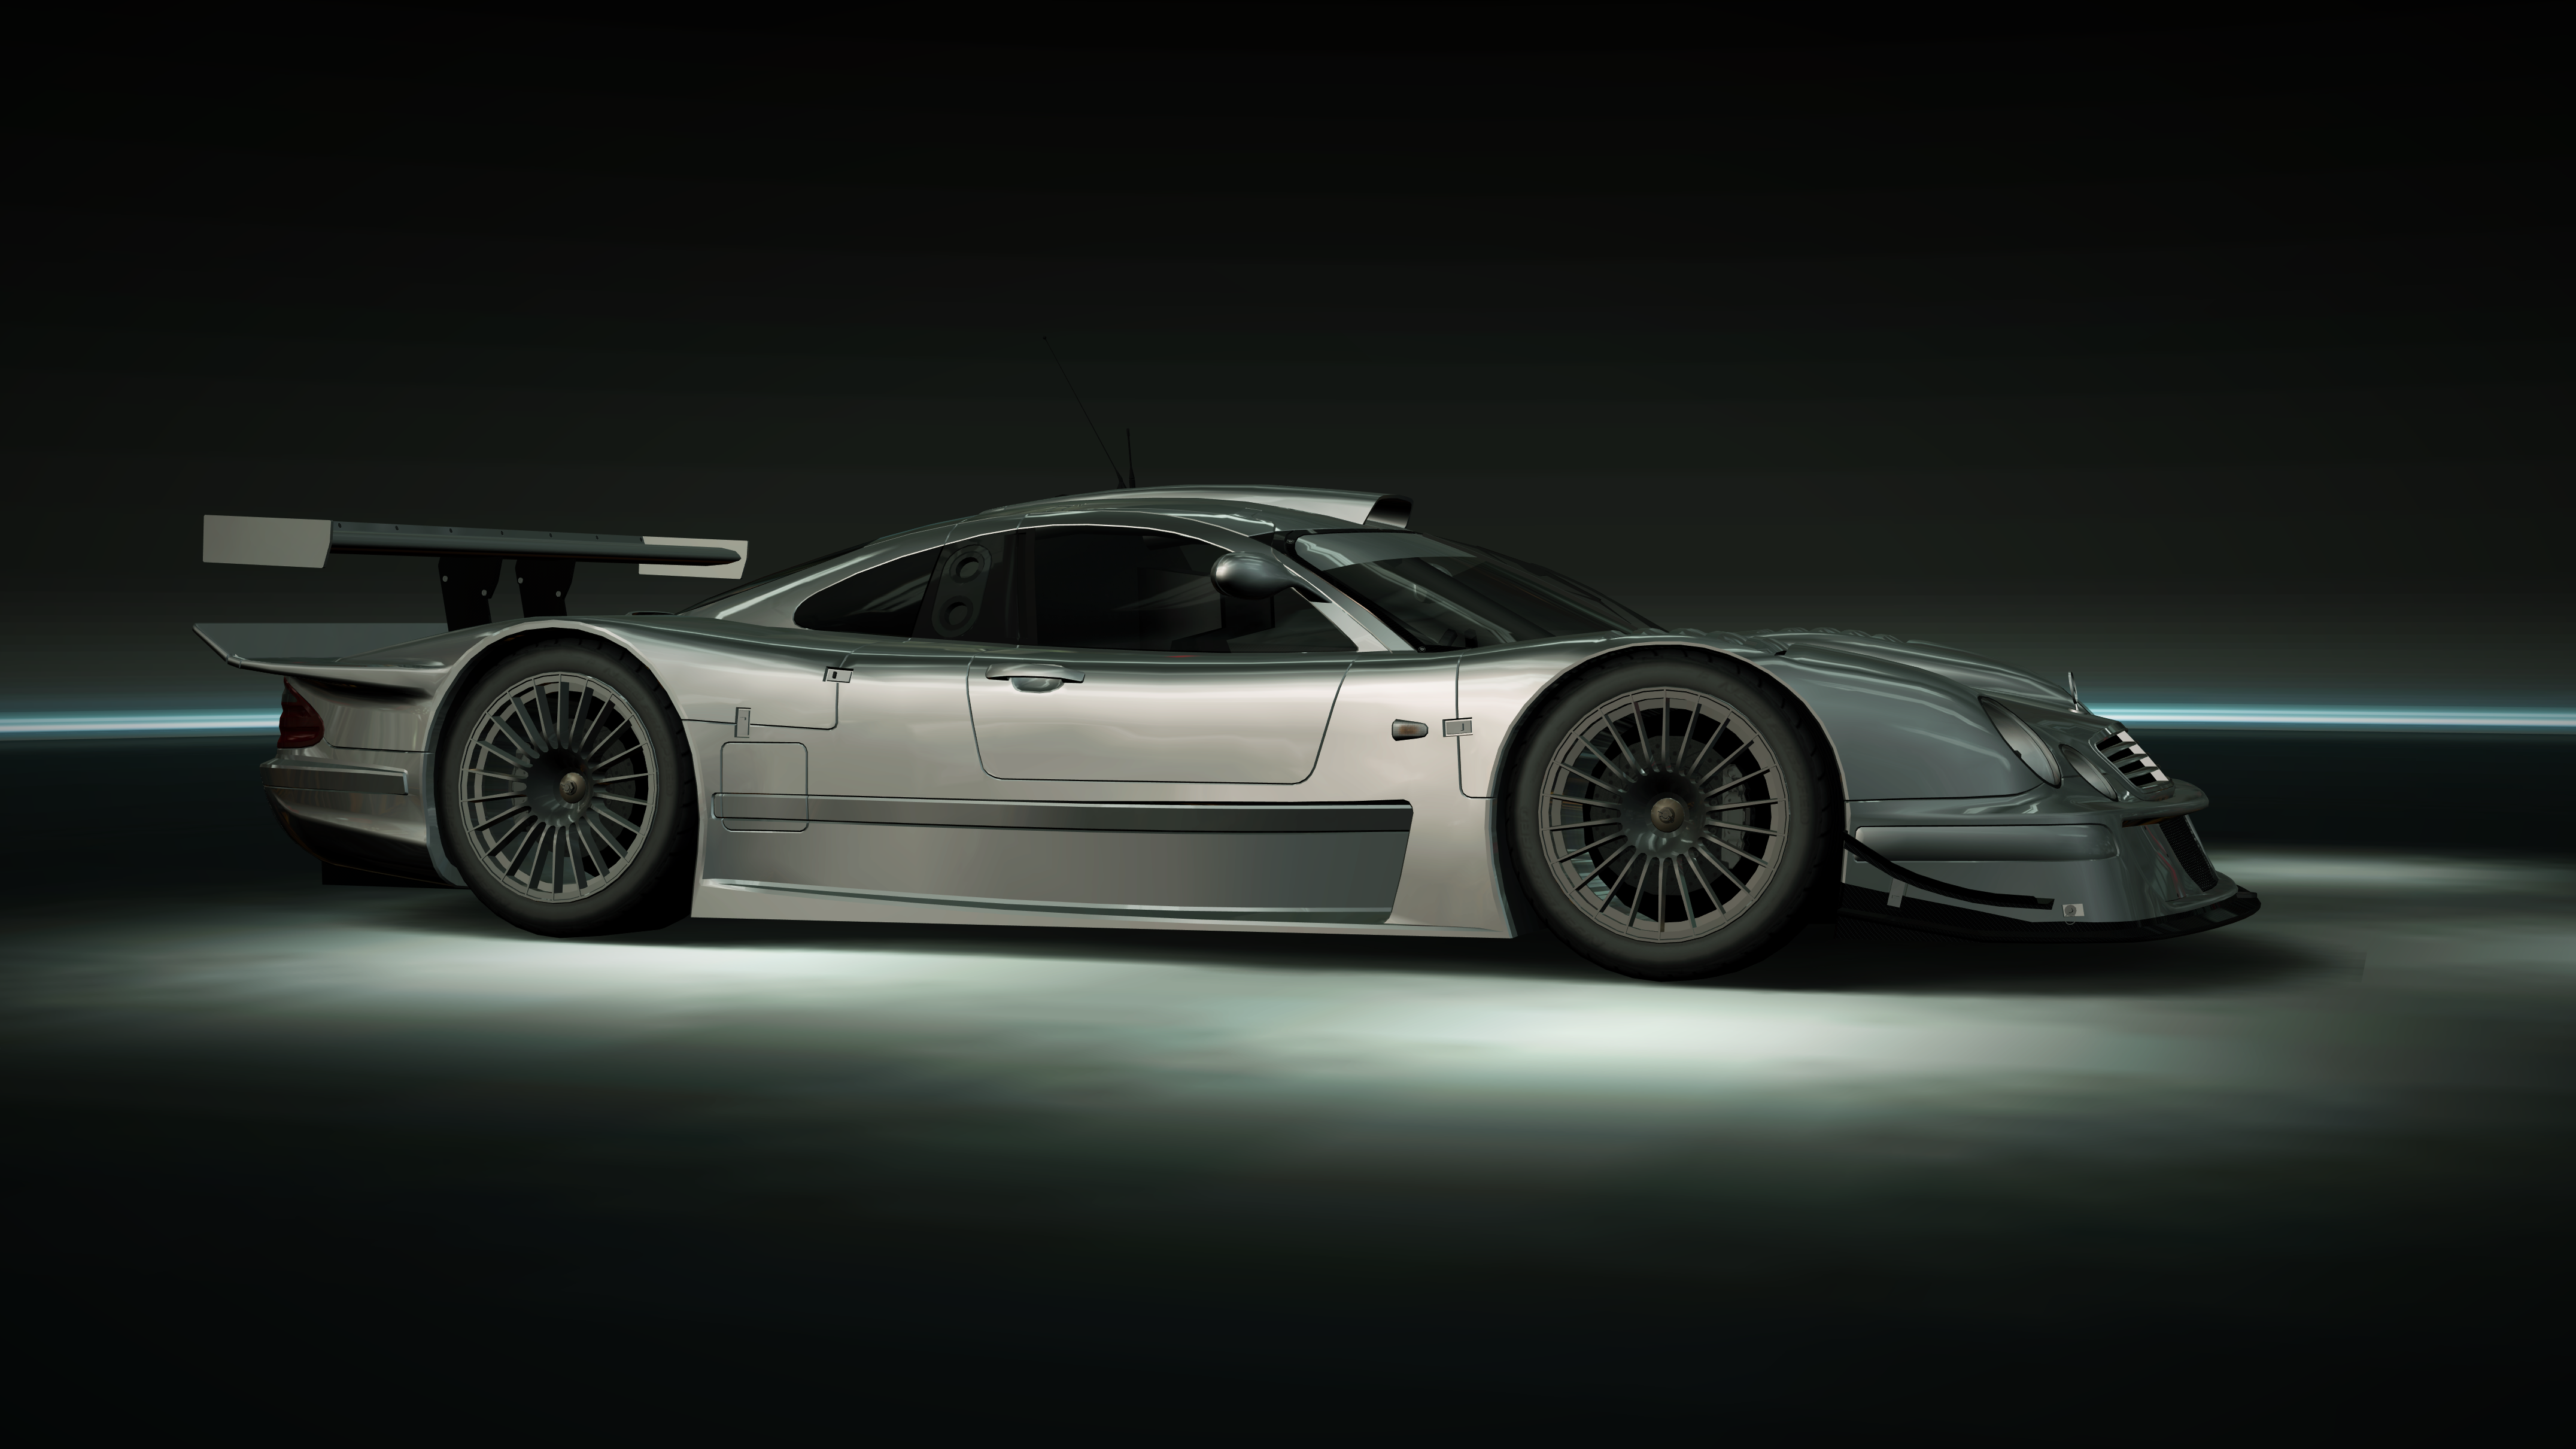 Mercedes Benz CLK GTR Need For Speed Need For Speed World Car Side View Simple Background Silver Car 4304x2421